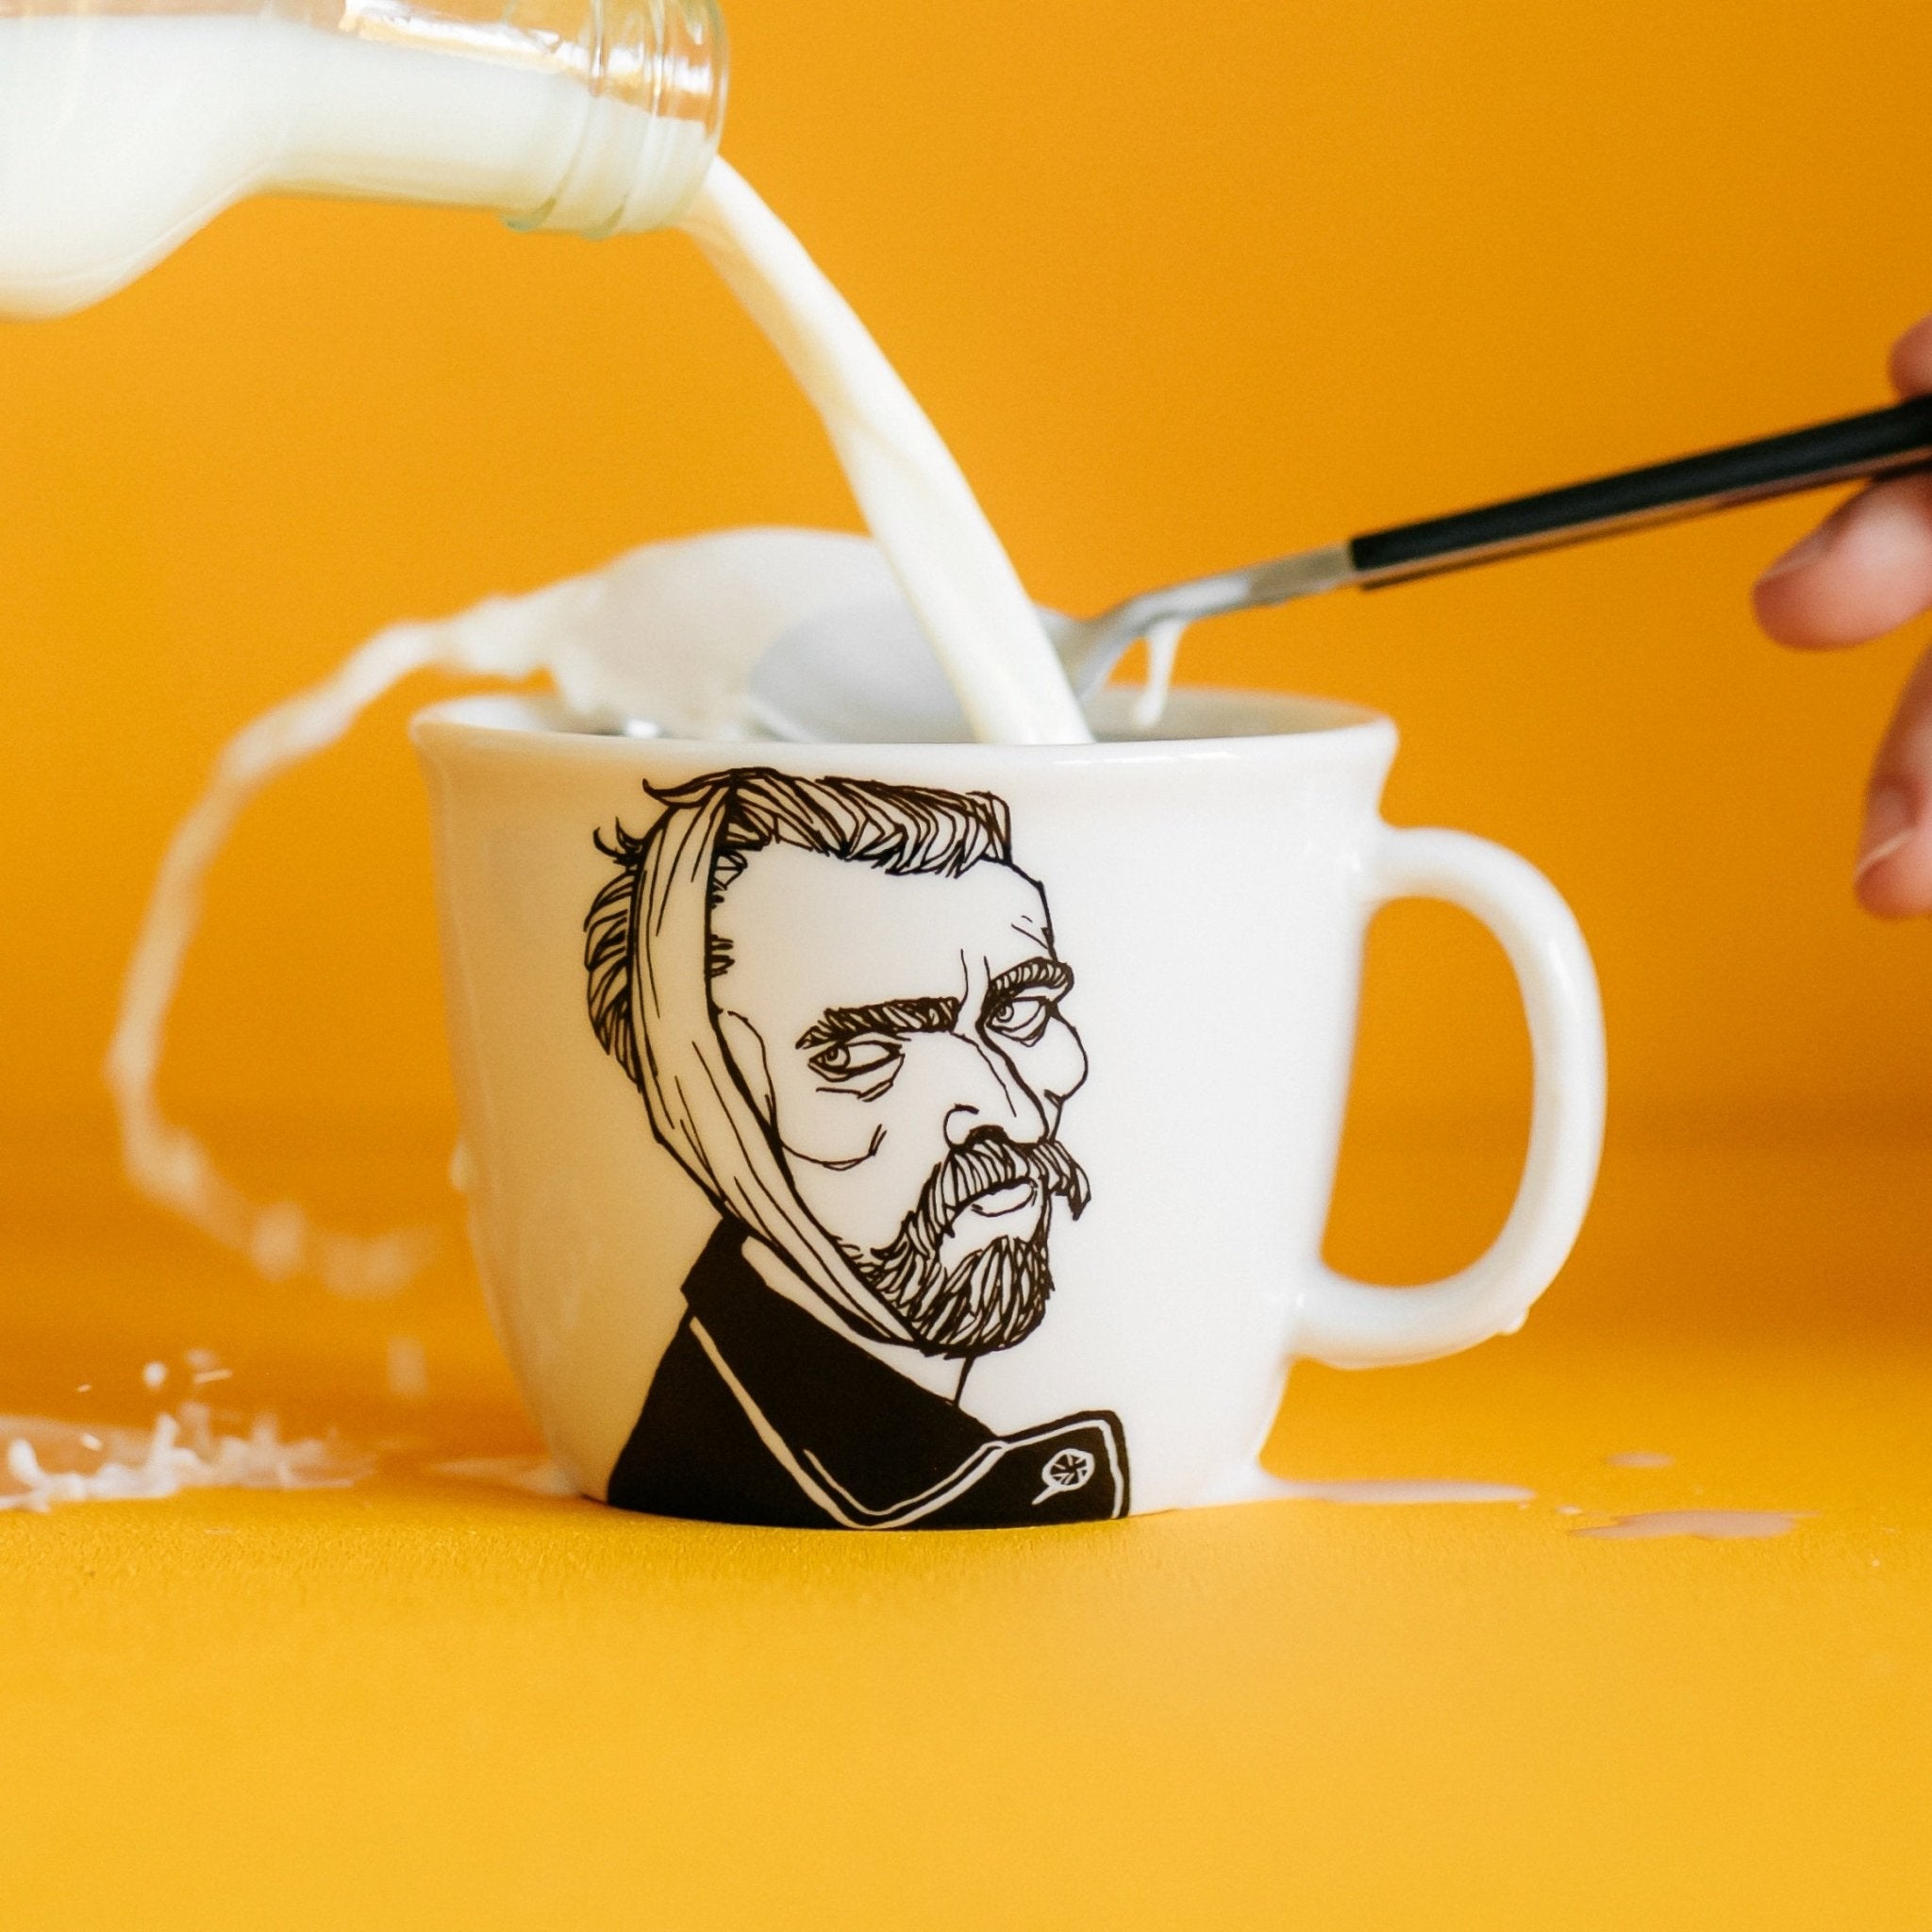 Porcelain cup inspired by Vincent van Gogh with milk